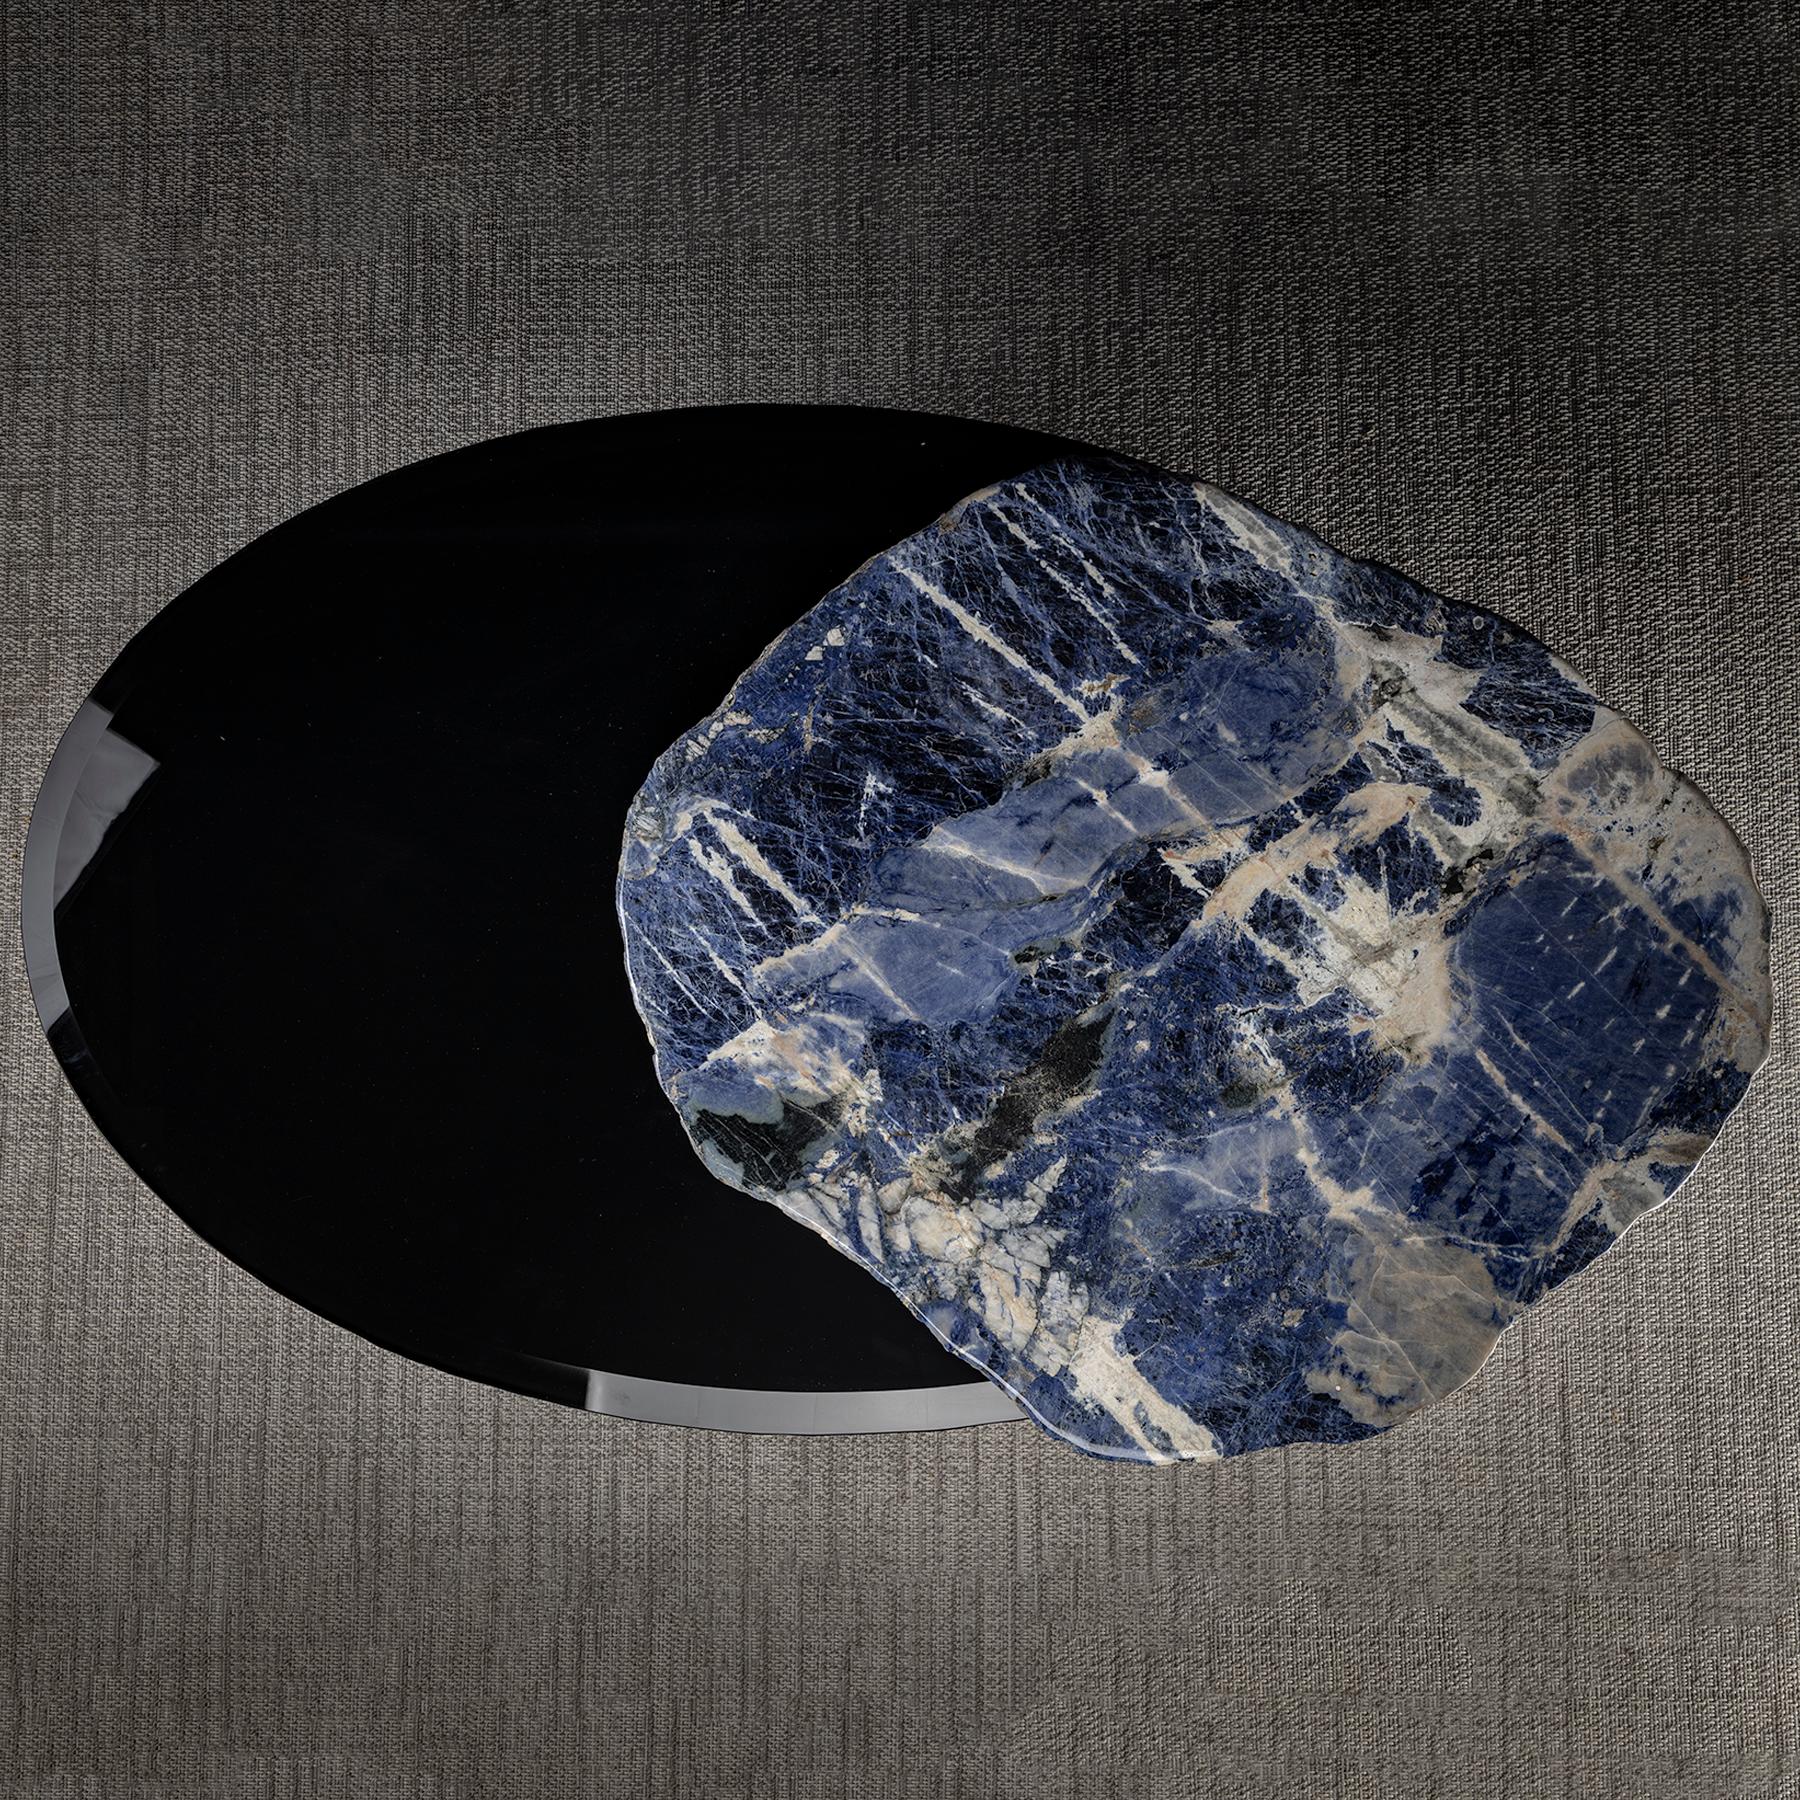 Contemporary Center Table, with Rotating Brazilian Sodalite Slab on Black Tempered Glass